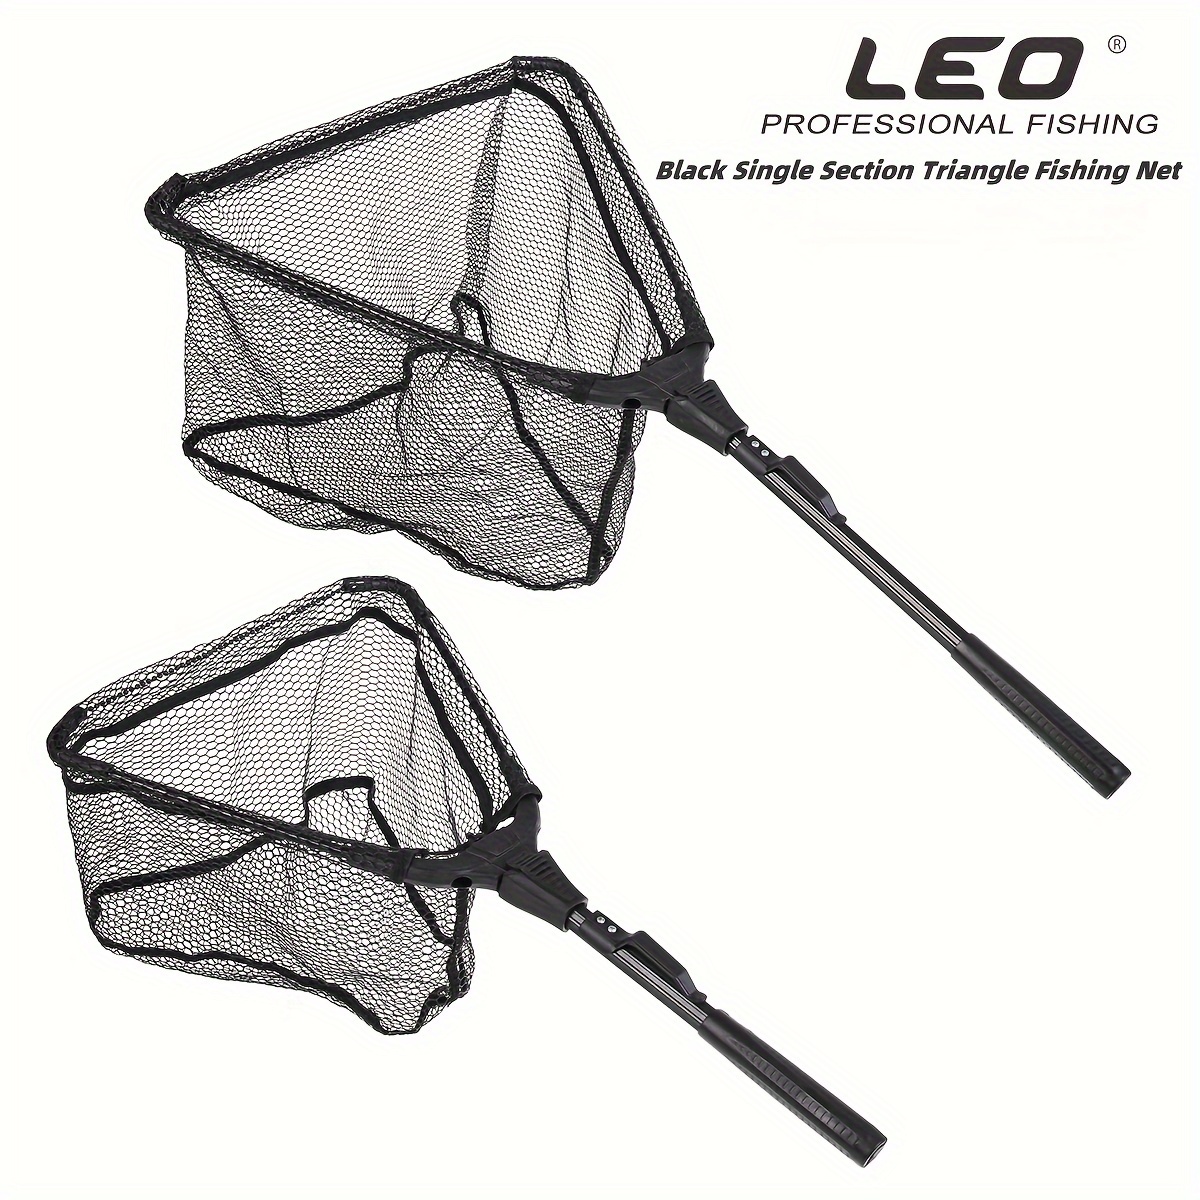 

Black Single Section Triangle Fishing Net, Ultra Lightweight Portable Foldable Fish Landing Net, Fly Fishing Hand Net Portable Outdoor Fishing Net, Outdoor Fishing Products